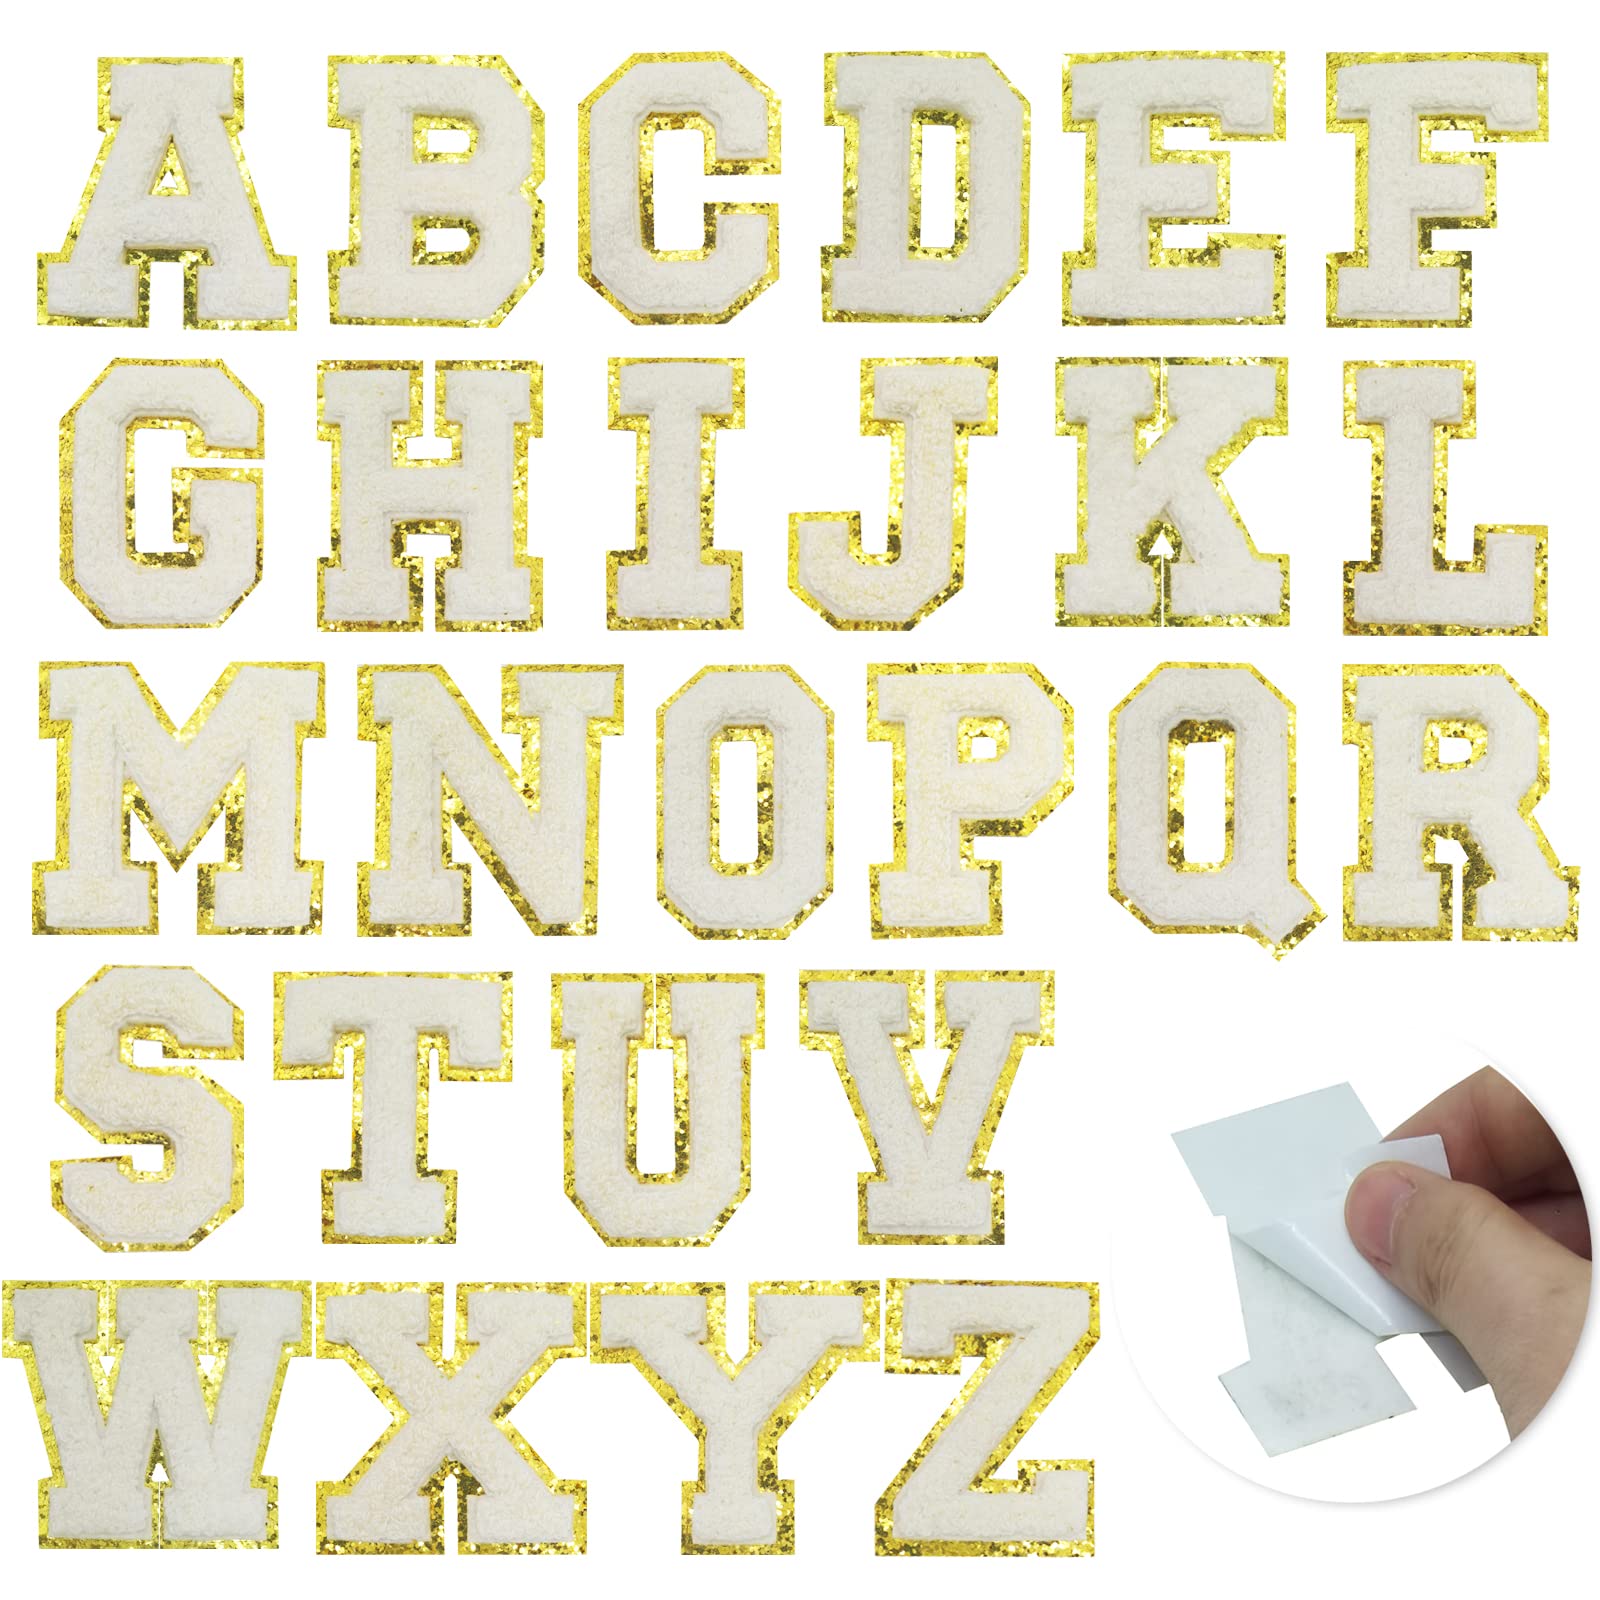 REGULAR Size Chenille Gold Sparkly Iron on Sewing Patch Letters, Alphabet,  Iron on Letters, Chenille Letters, Varsity Letters, A-Z Letters 